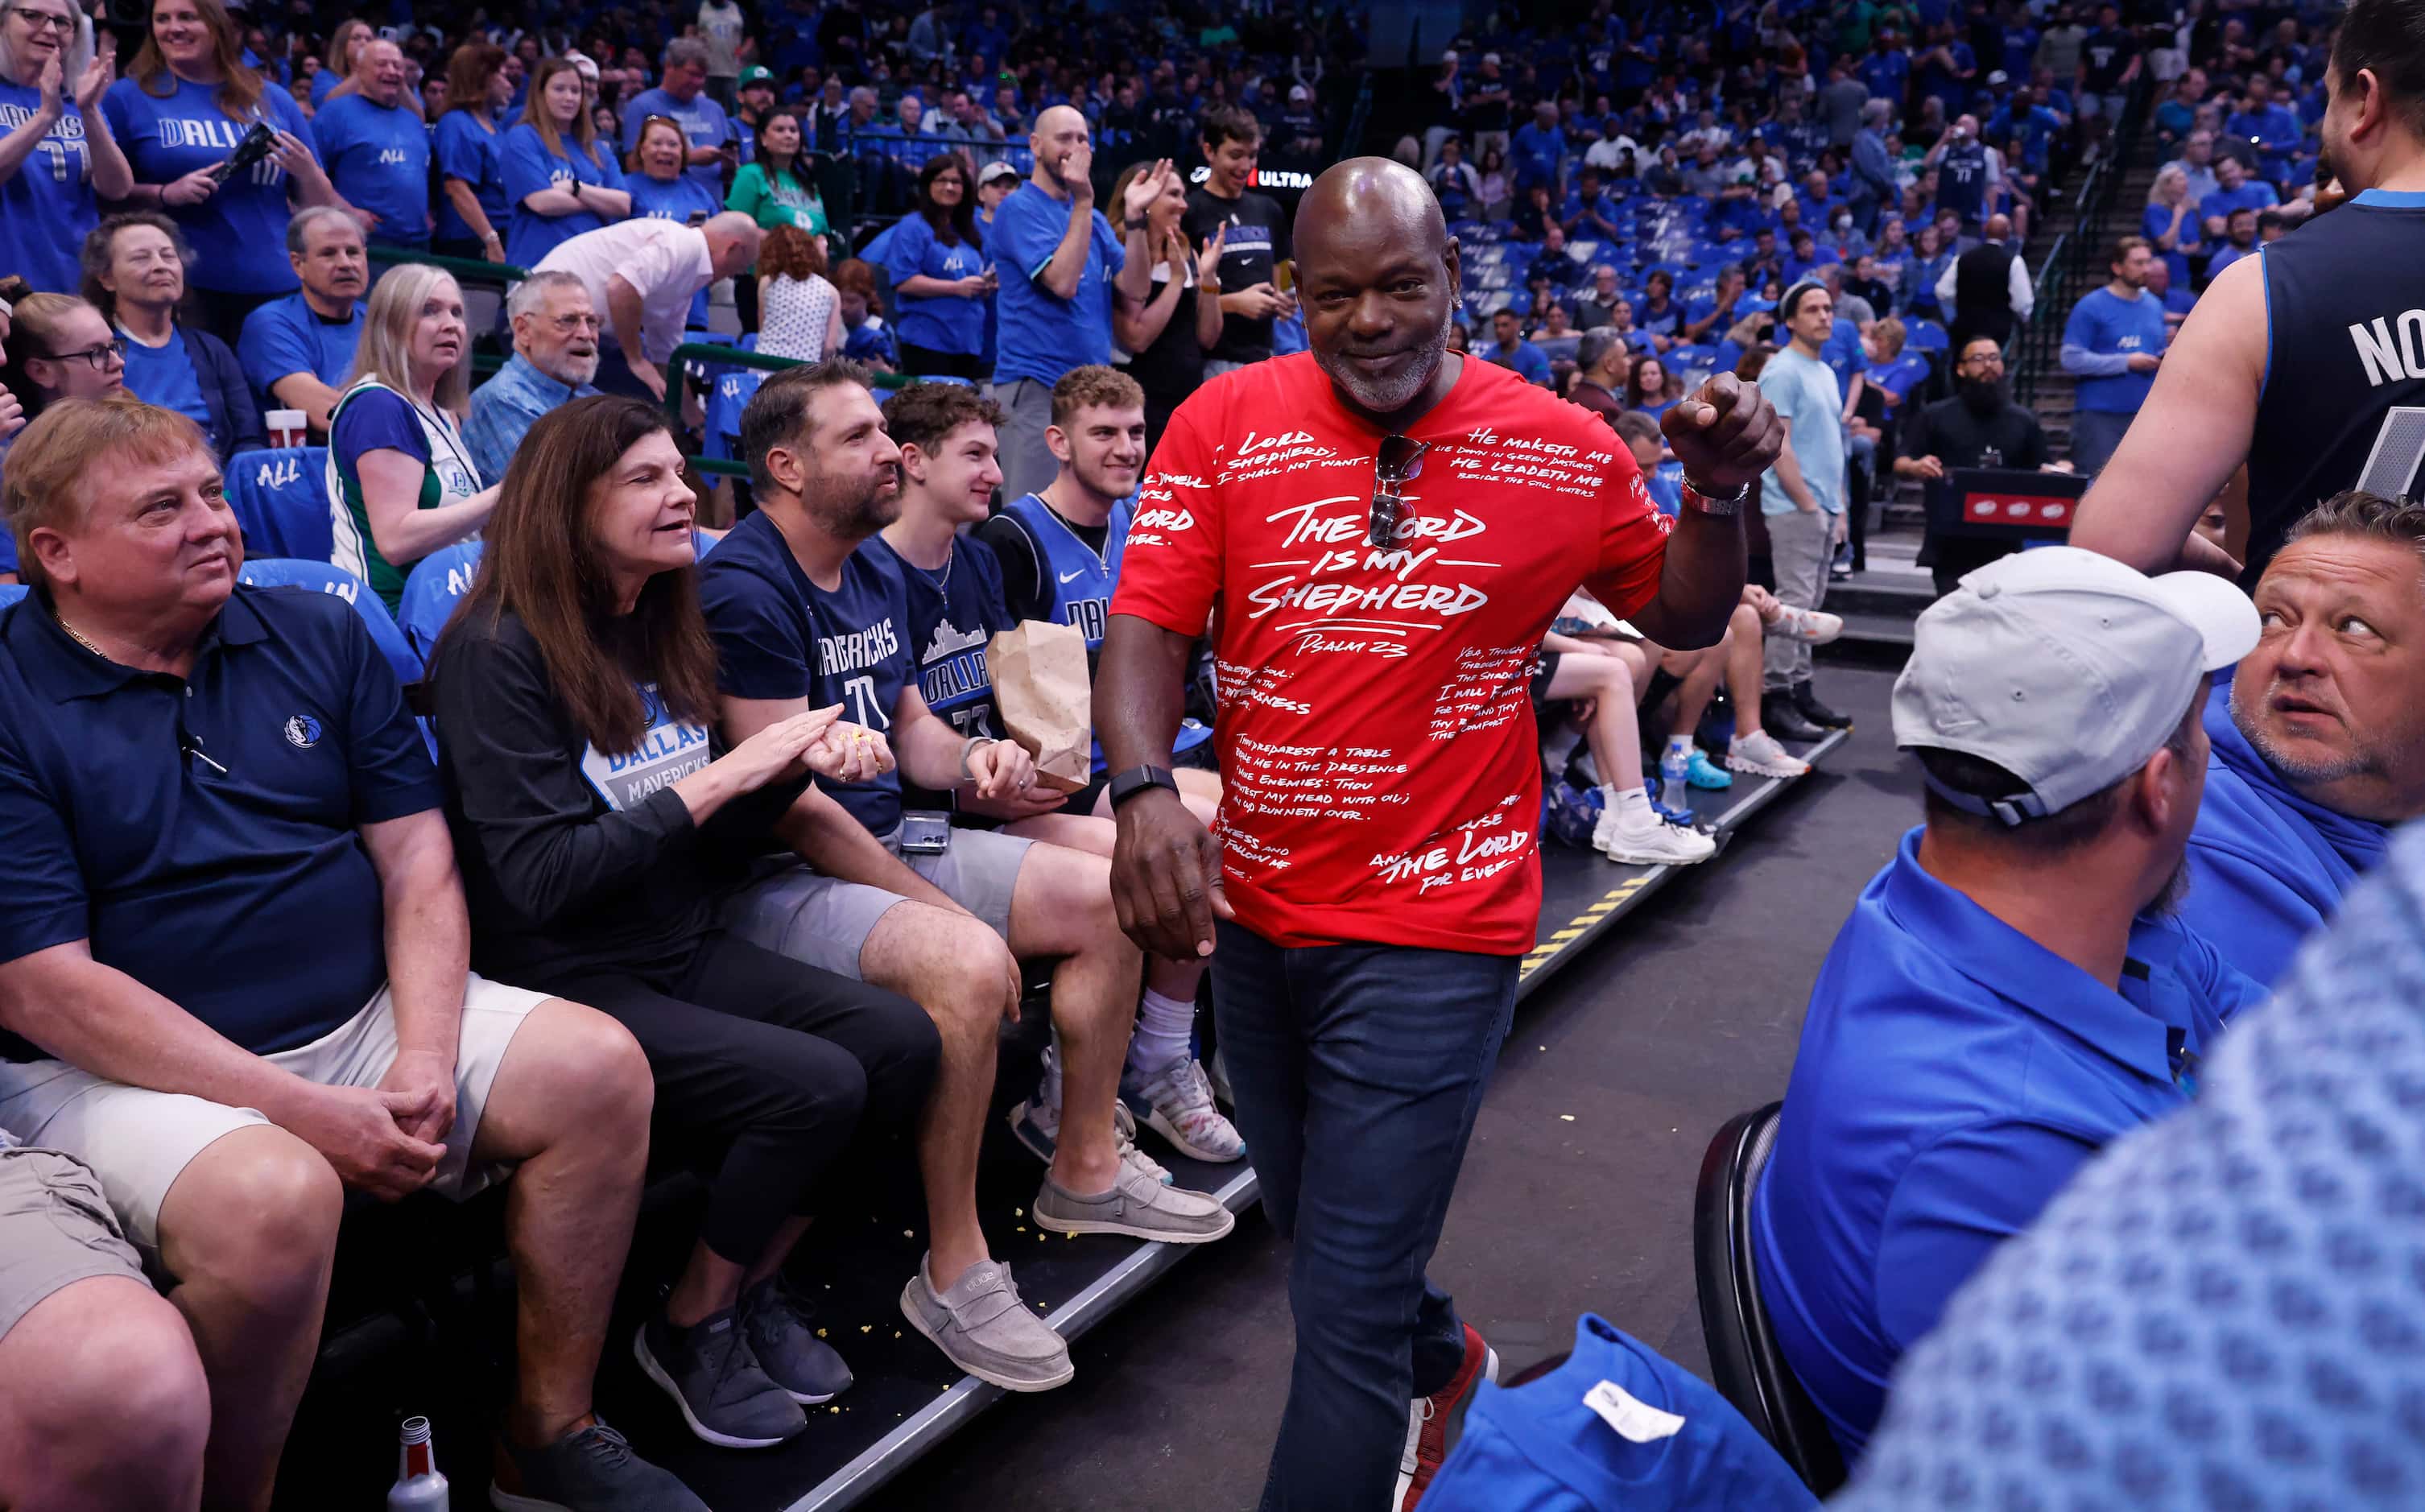 Dallas Cowboys Hall of Fame running back arrives for the Dallas Mavericks playoff game...